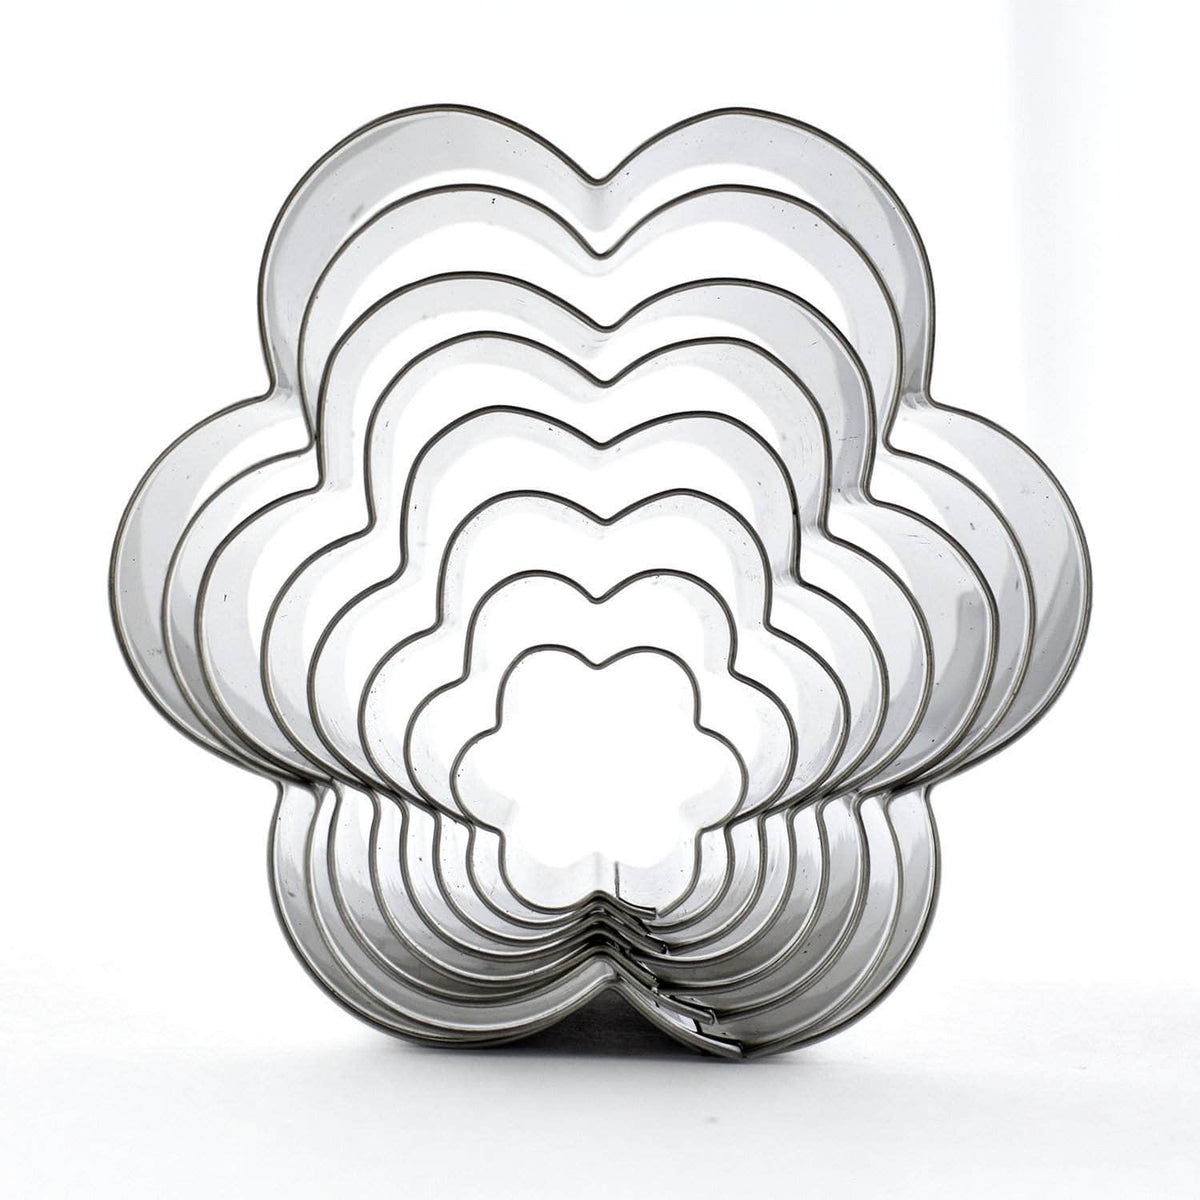 *New* Flower cookie cutters, set of 8